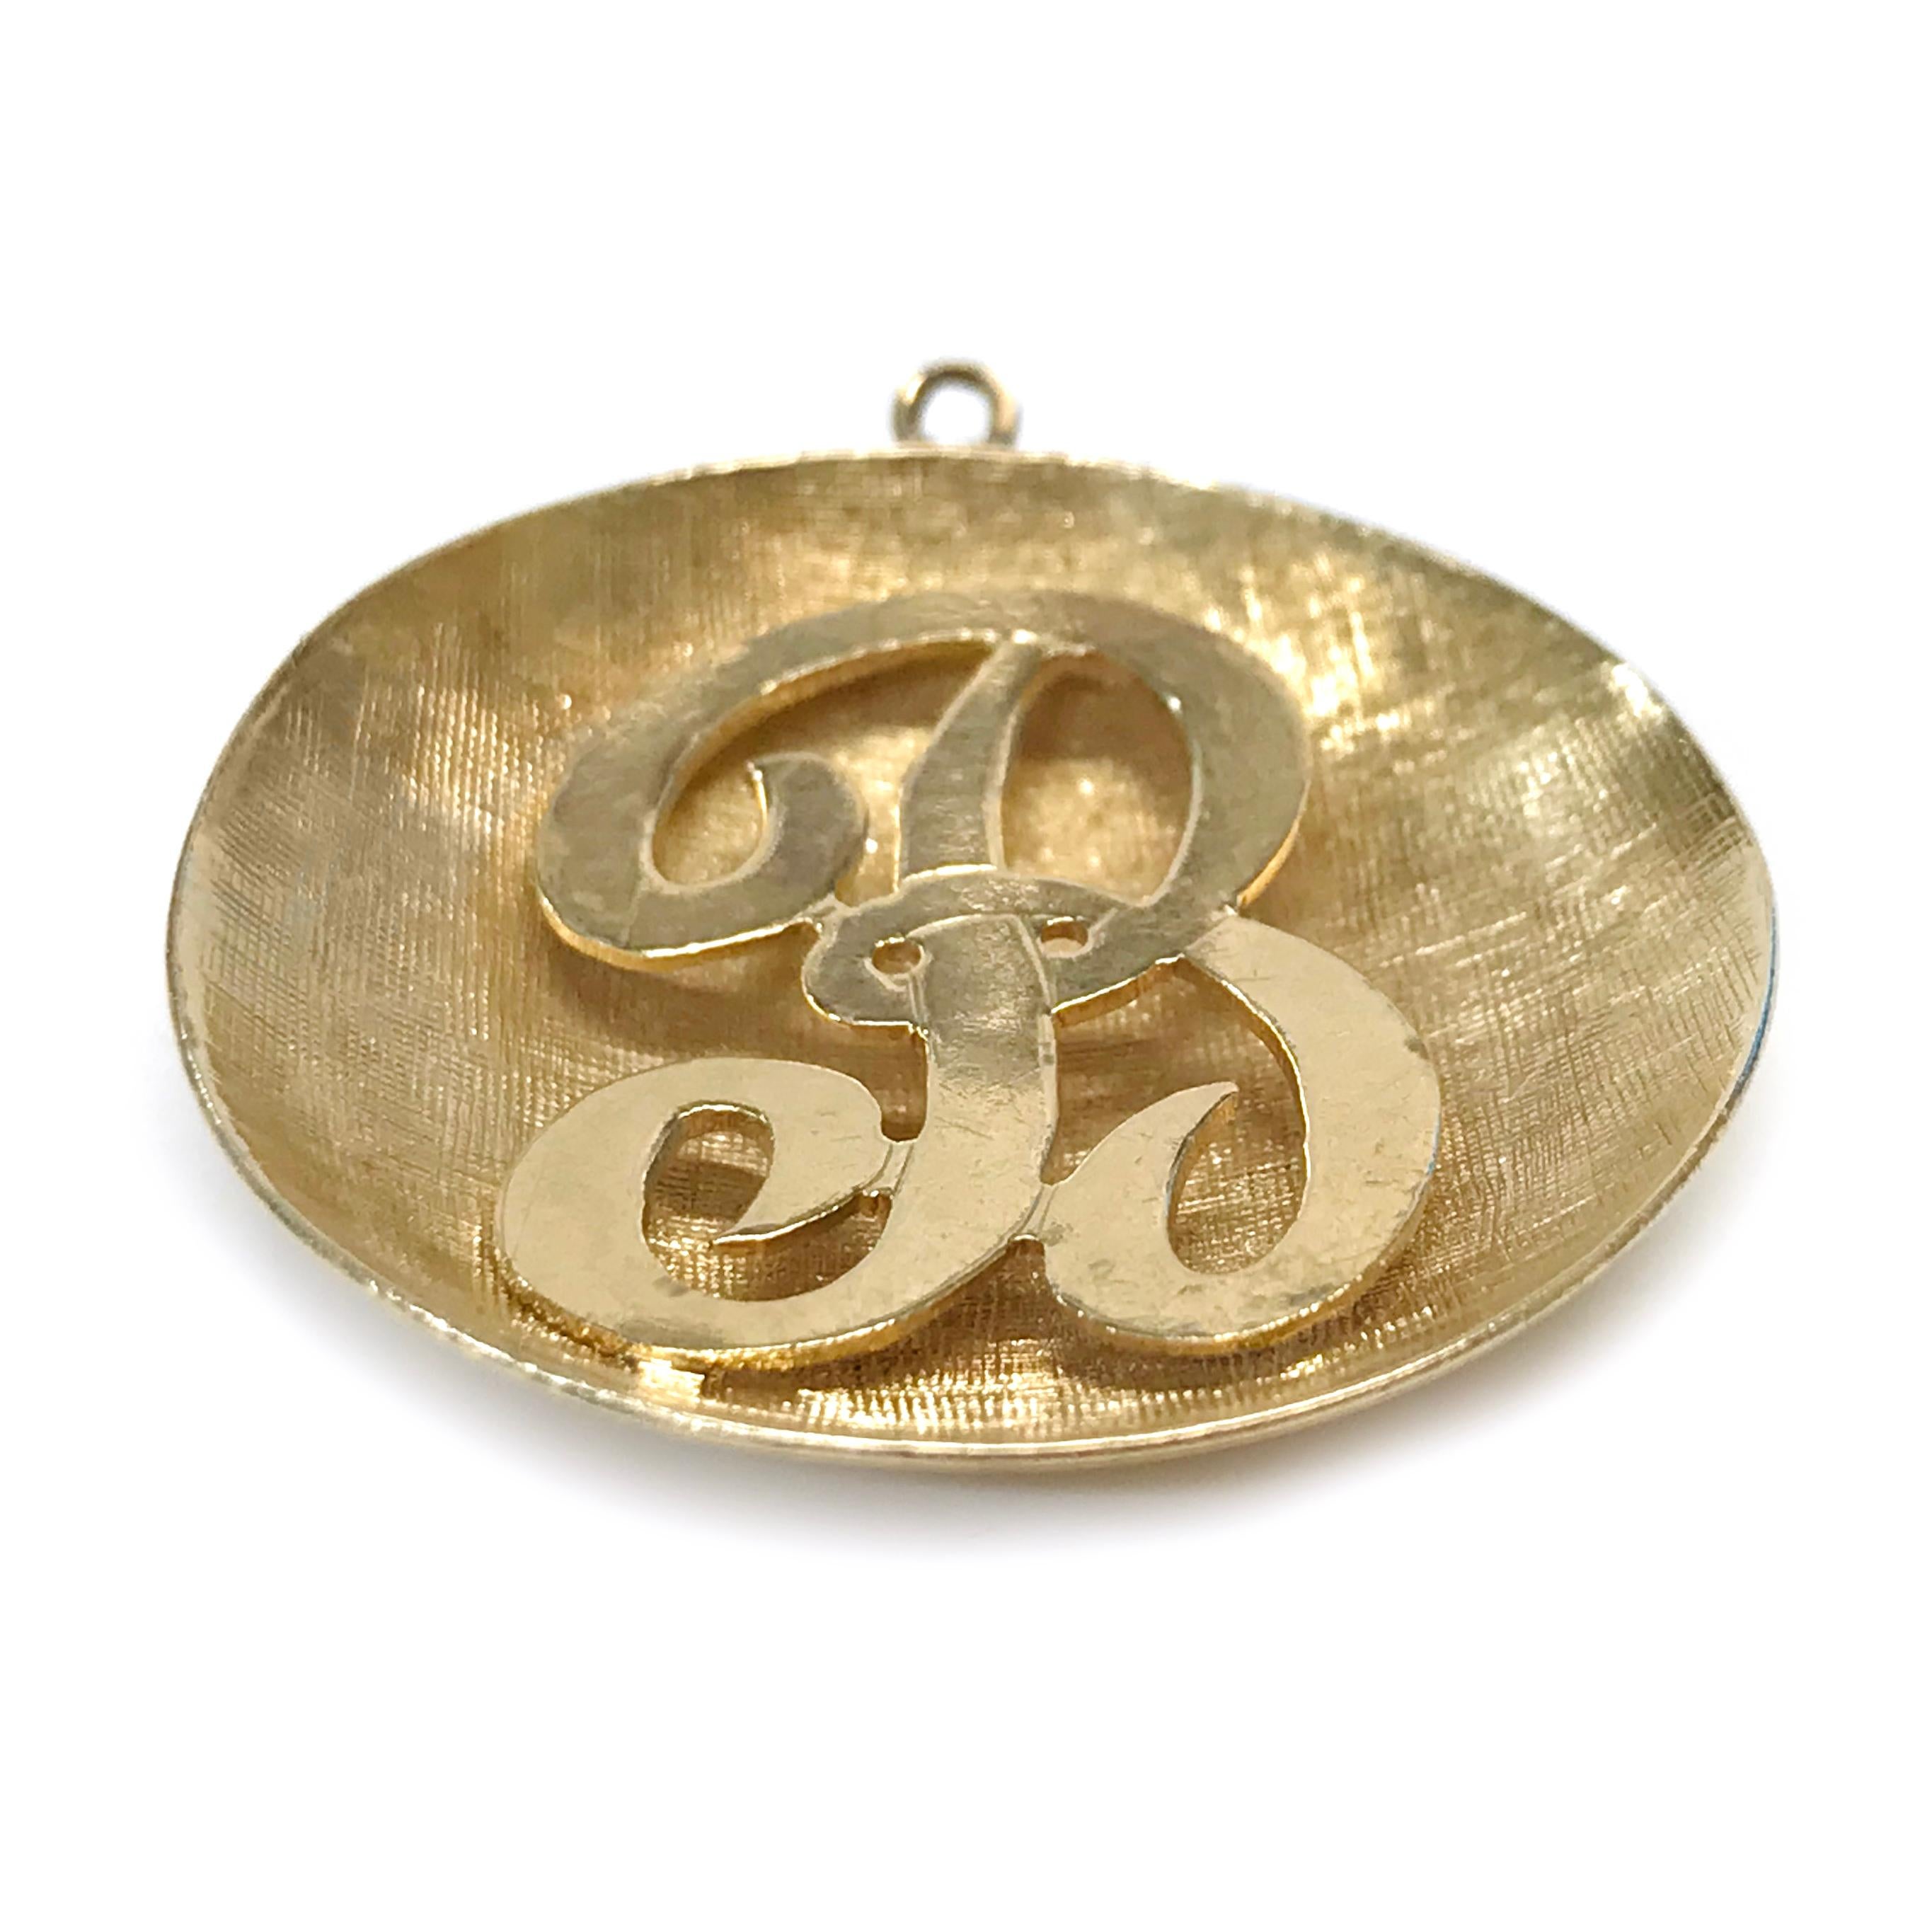 14 Karat B Initial Pendant. The pendant measures 30.2mm in diameter. The front of the disc-shaped pendant has a herringbone texture with a cursive letter B in the center. Engraved in cursive on the back is For Bea Sydell & Norman 4-61. The total